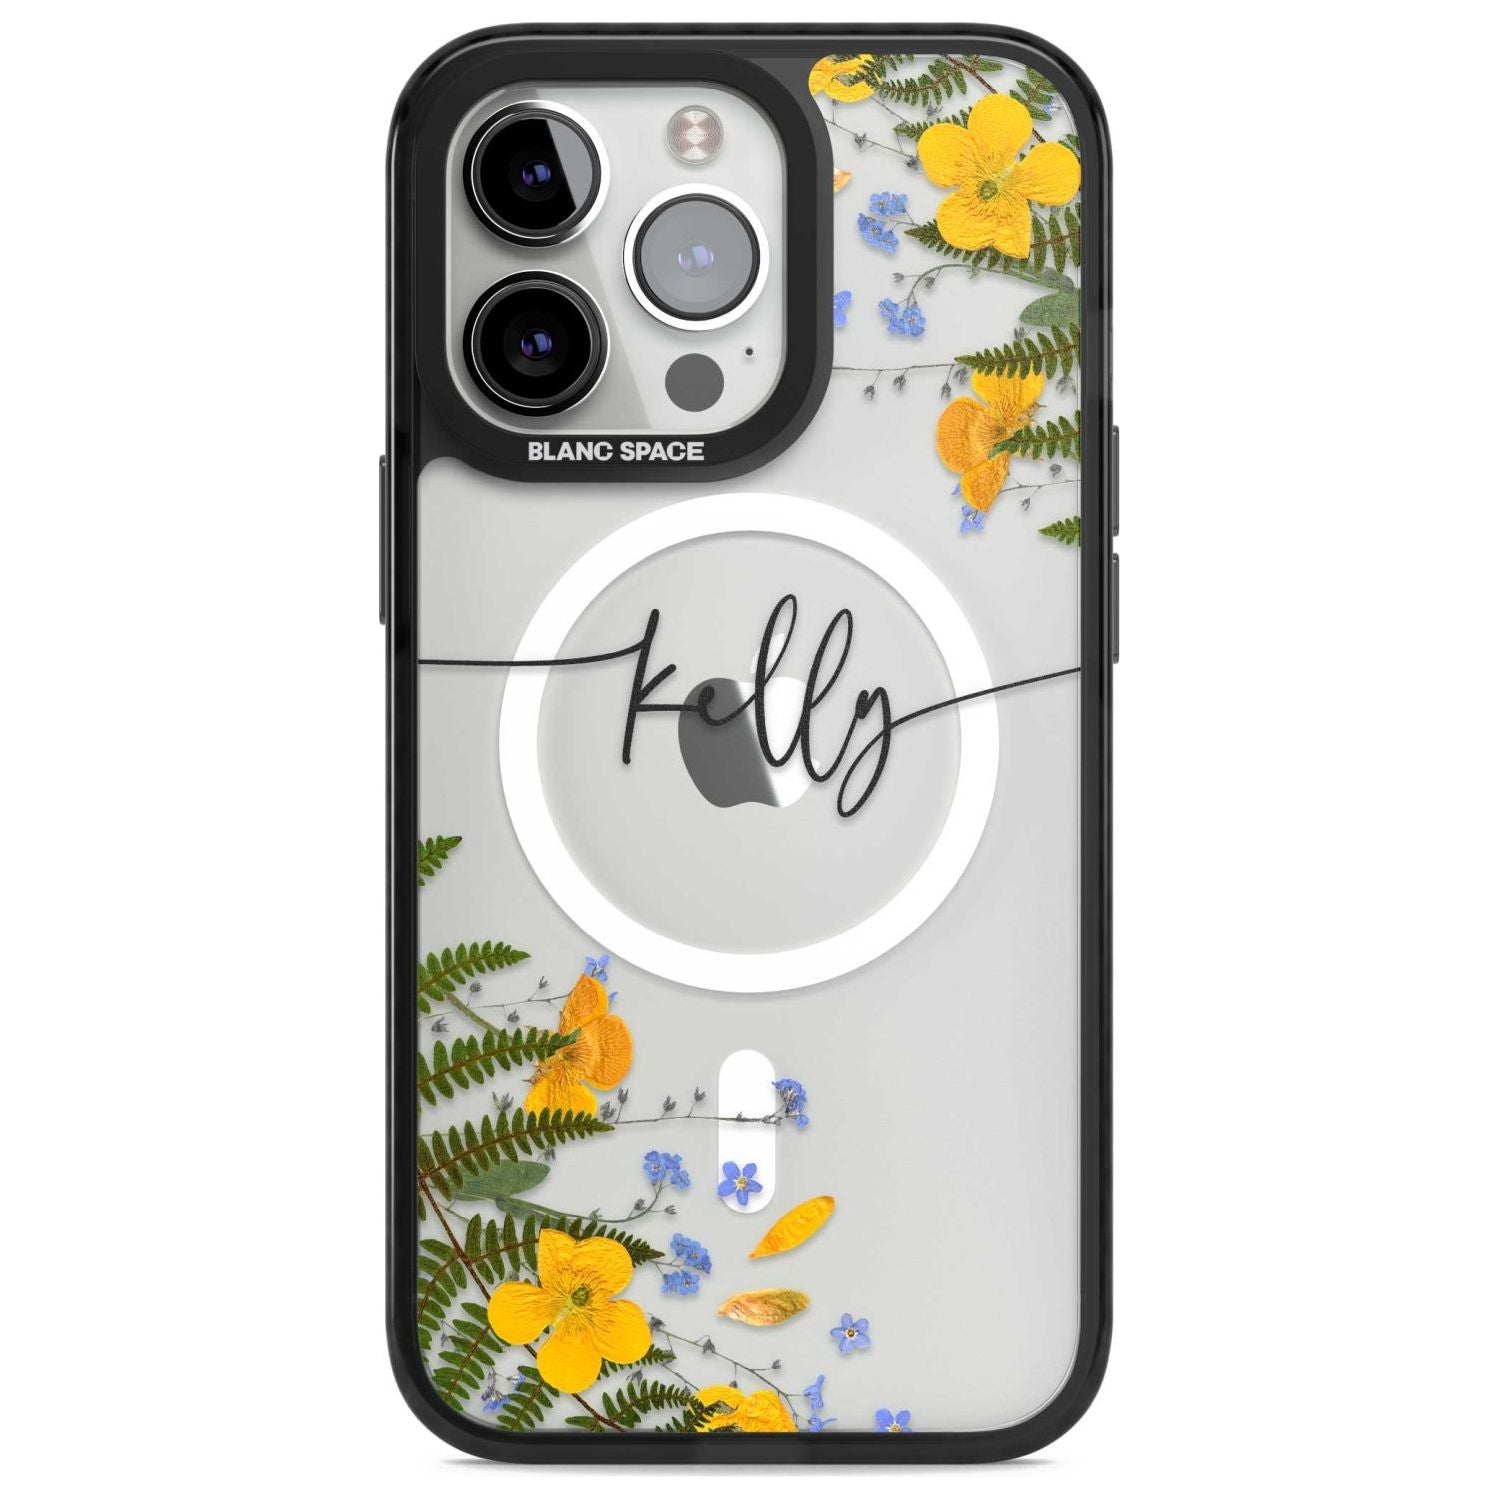 Personalised Ferns & Wildflowers Custom Phone Case iPhone 15 Pro Max / Magsafe Black Impact Case,iPhone 15 Pro / Magsafe Black Impact Case,iPhone 14 Pro Max / Magsafe Black Impact Case,iPhone 14 Pro / Magsafe Black Impact Case,iPhone 13 Pro / Magsafe Black Impact Case Blanc Space